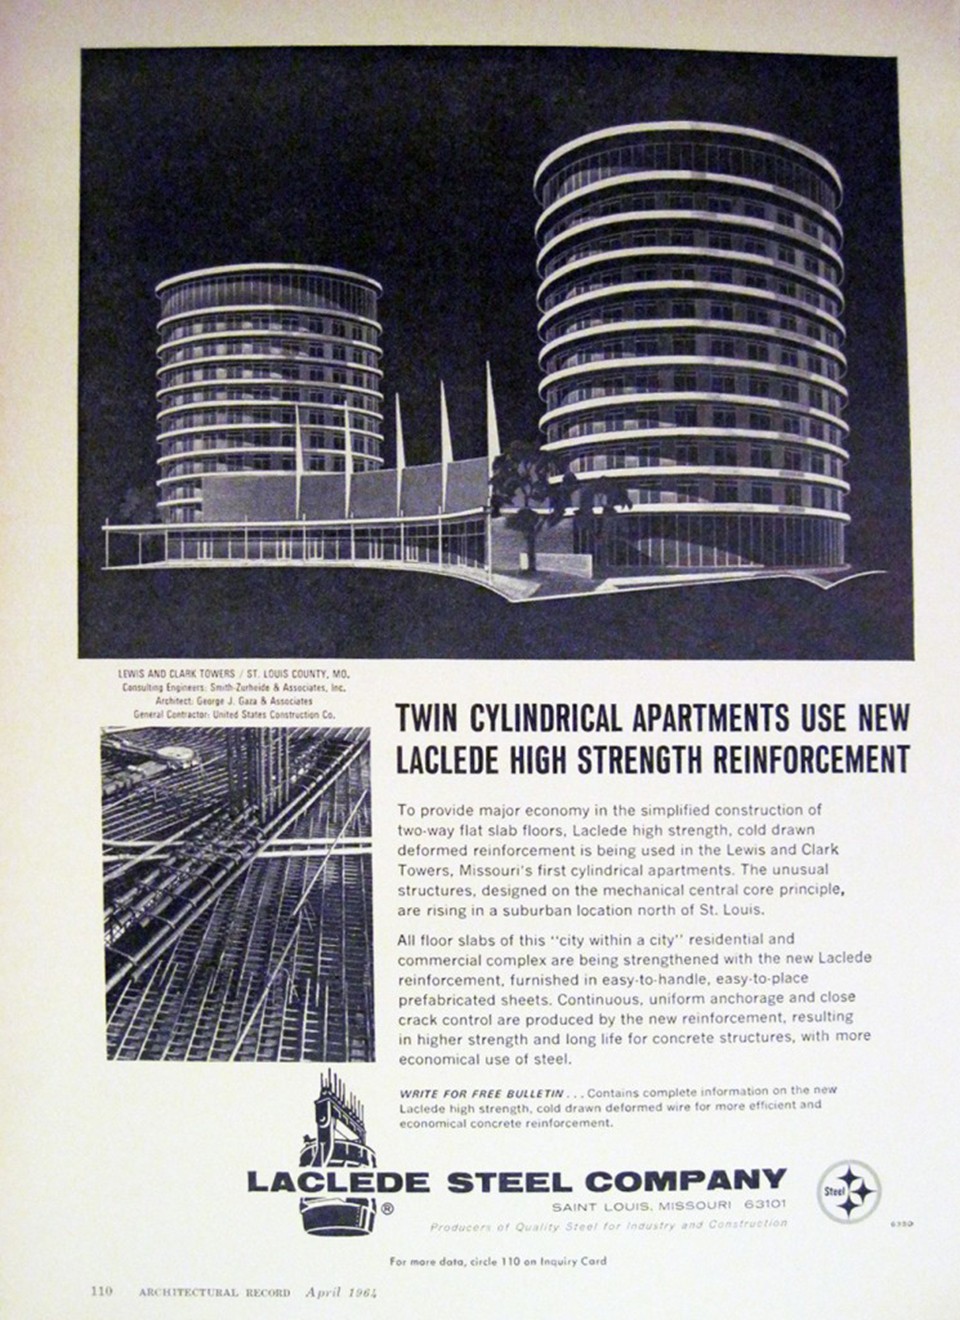 San Francisco blogger John Lumea found this 1964 Architectural Digest advertisement. - COURTESY OF B.E.L.T.